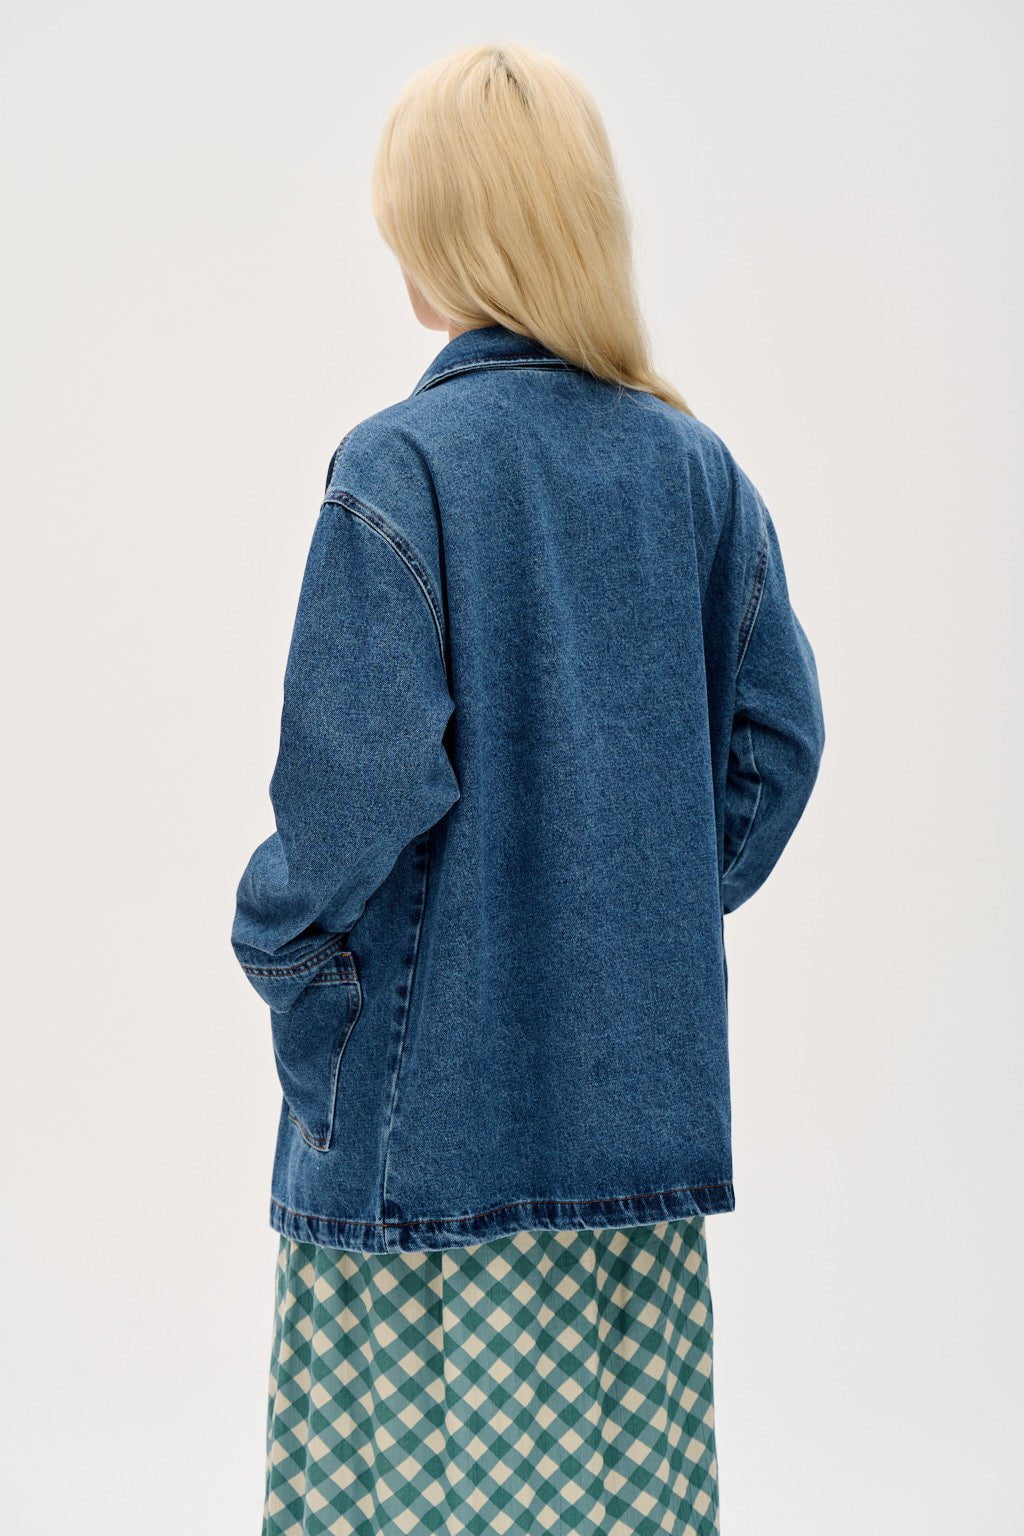 BDG Relaxed Denim Trucker Jacket | Urban Outfitters Japan - Clothing,  Music, Home & Accessories